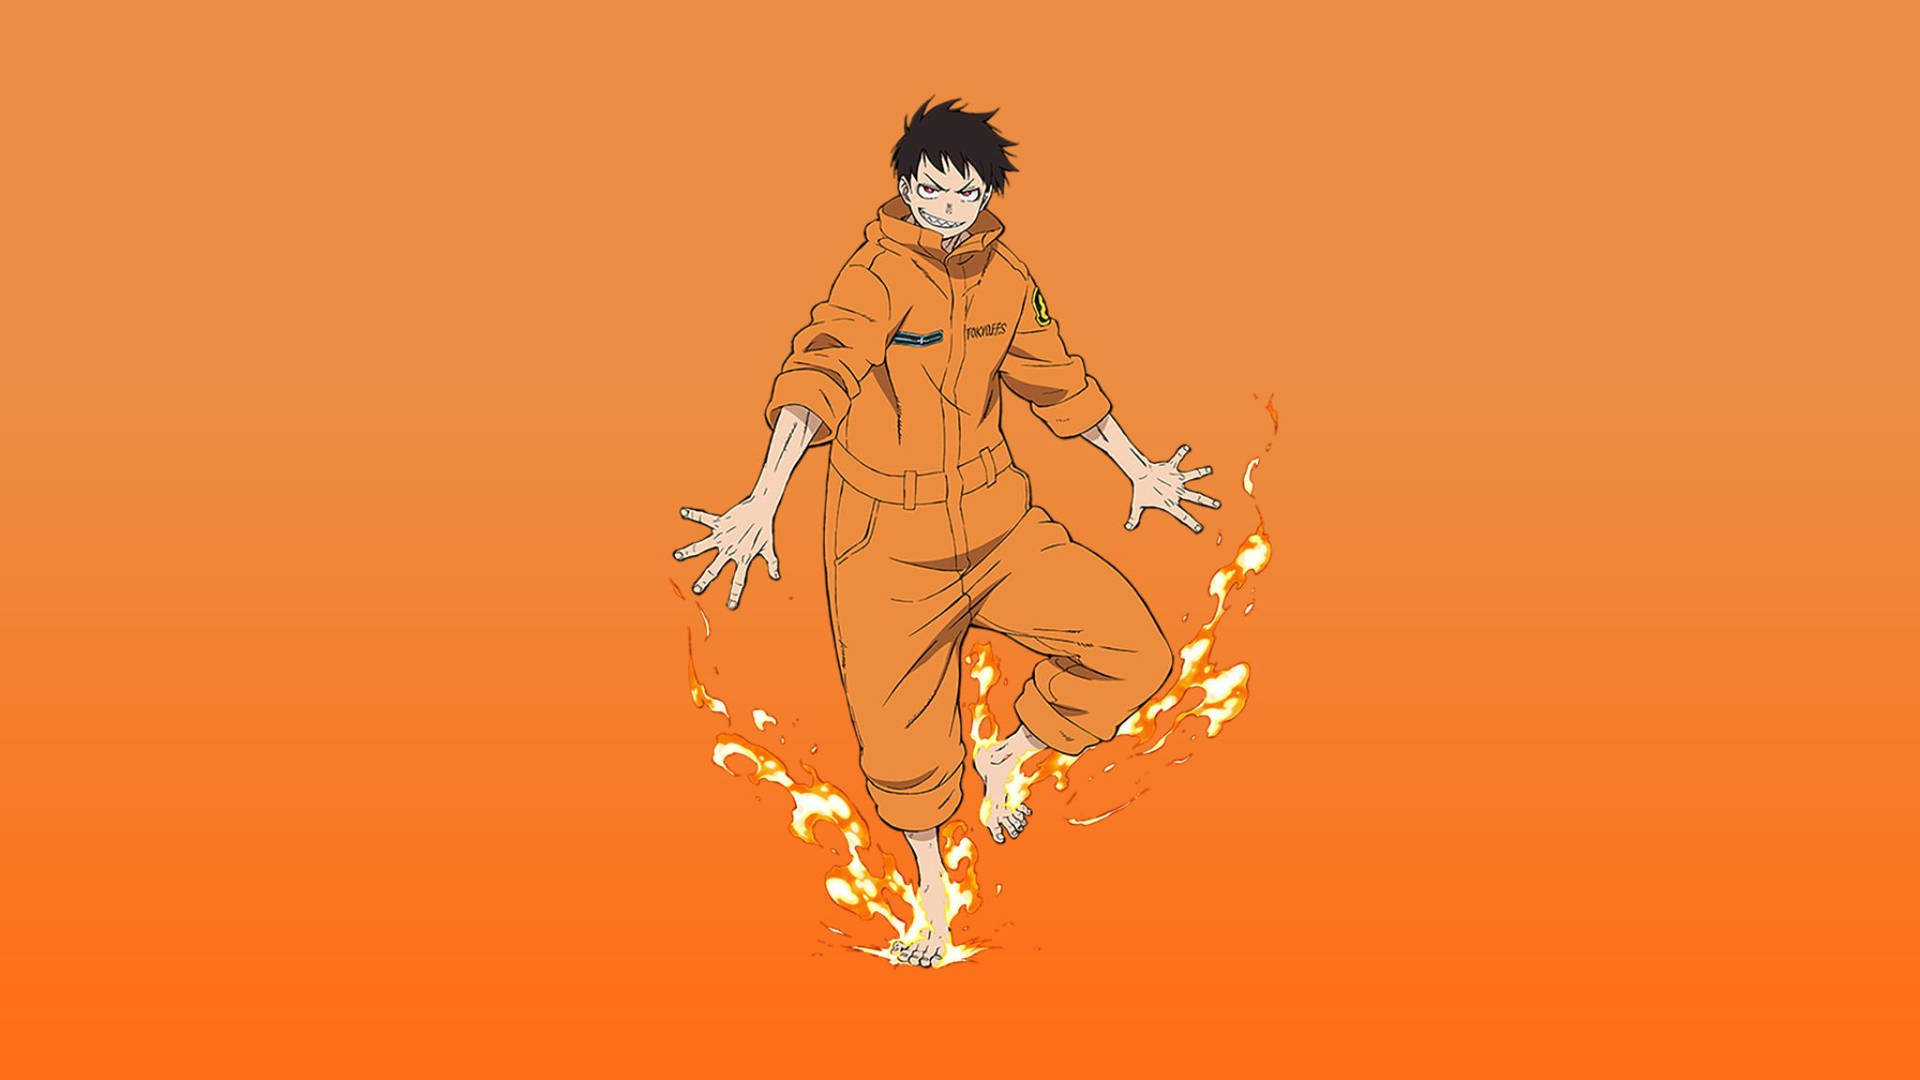 Anime Fire Force Kusakabe Shinra Poster Decorative Painting Canvas Wall Art  Living Room Poster Bedroom Painting 30x45cm : Amazon.de: Home & Kitchen